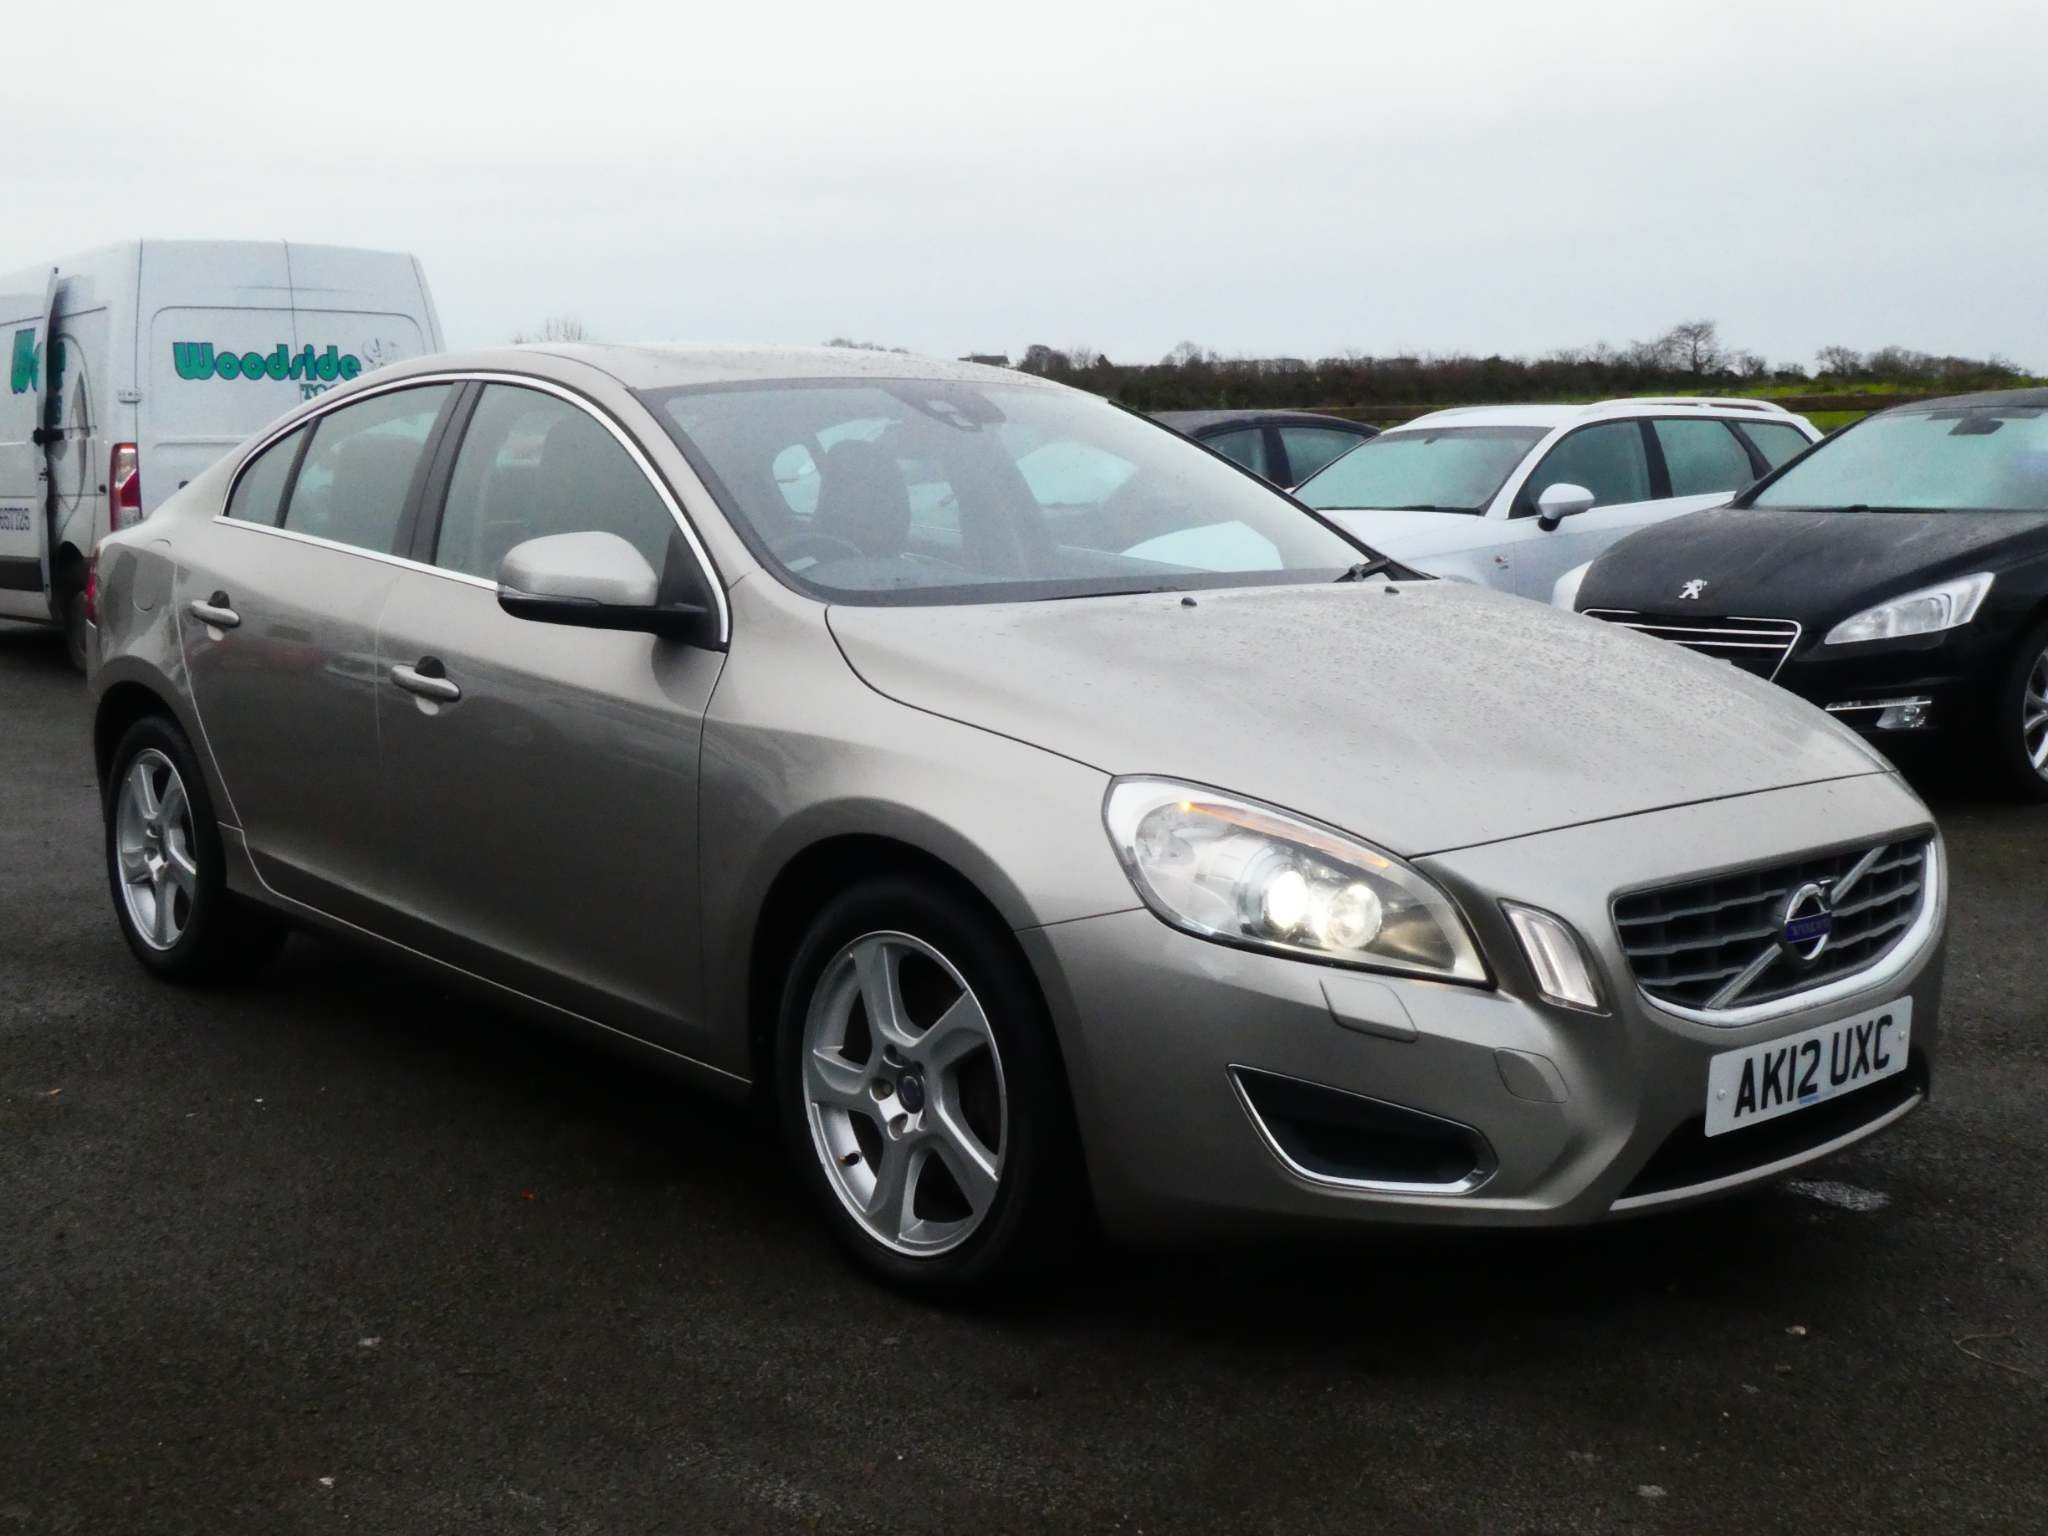 test22012 VOLVO S60 2.4 D5 SE Lux Geartronic Diesel Automatic nice spec lovely example – FC Motors 52 Carntall Rd, Newtownabbey BT36 5SD